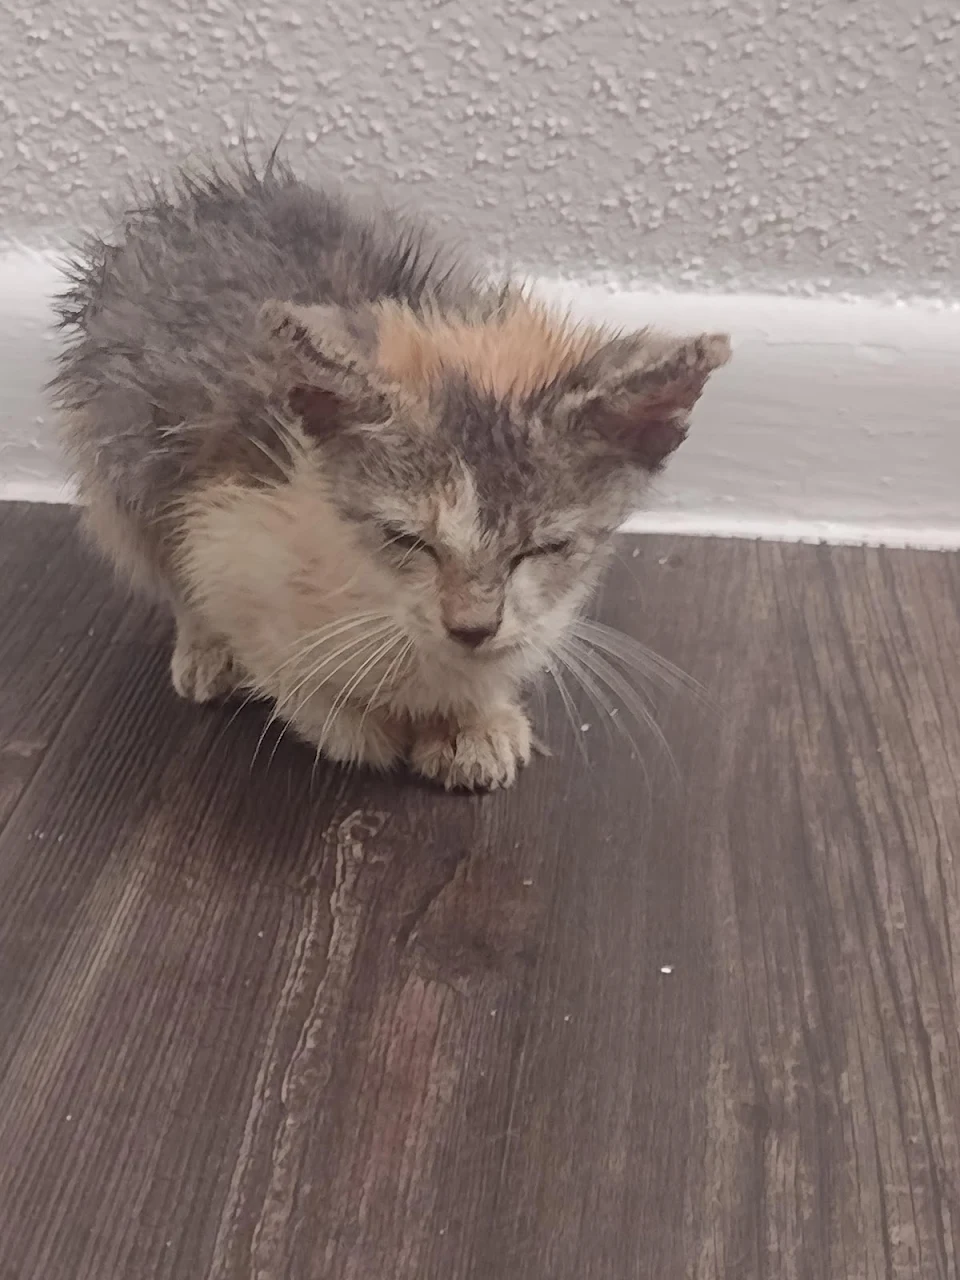 I rescued this kitten, it was hanging out by our apartment complex and I was lucky to grab him I saw some others but I wasn't able to grab them. What can I do?